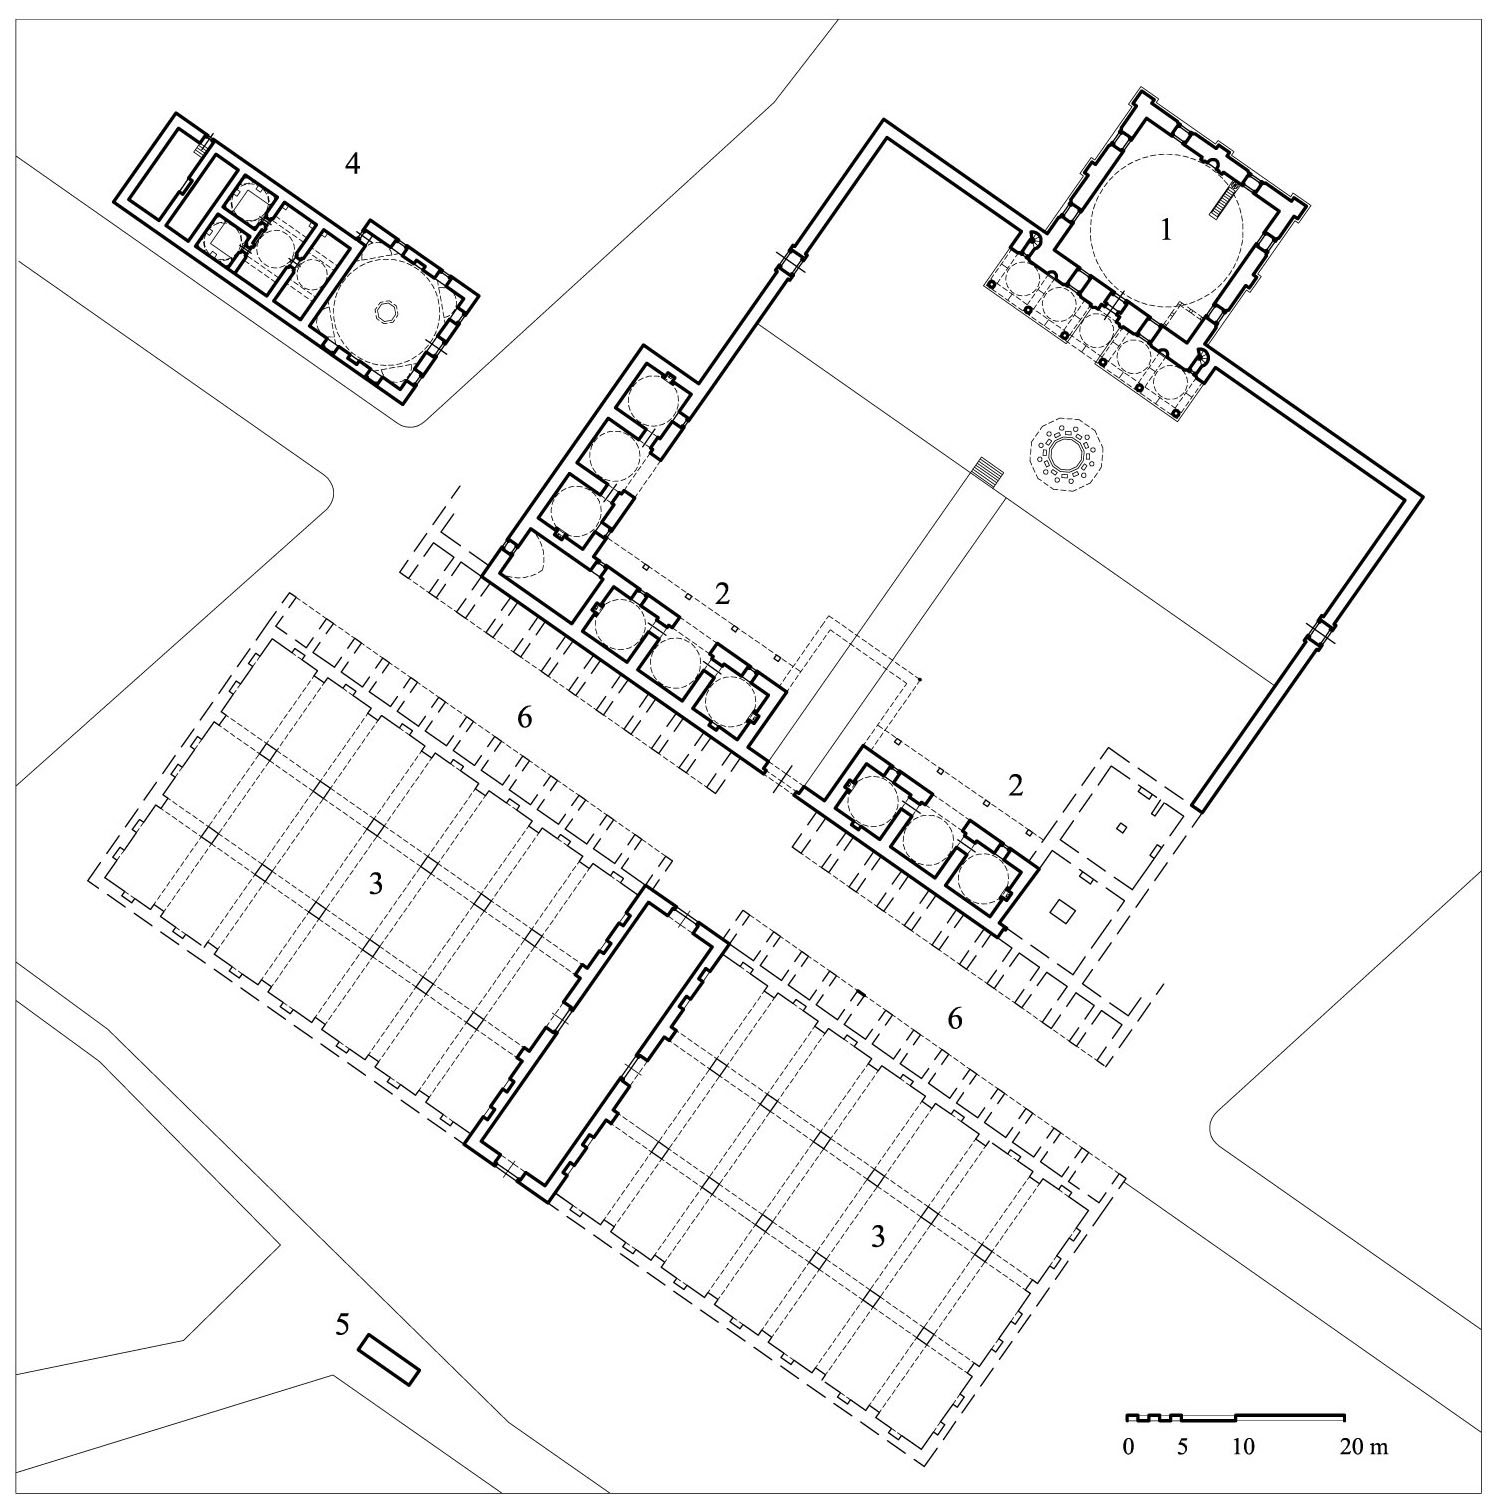 Floor plan  of the complex showing (1) mosque, (2) excavated remains of guestrooms and hospice, (3) double caravanserai (hypothetical reconstruction), (4) bathhouse, (5) public fountain, (6) bazaar (<i>arasta</i>) with excavated shop foundations